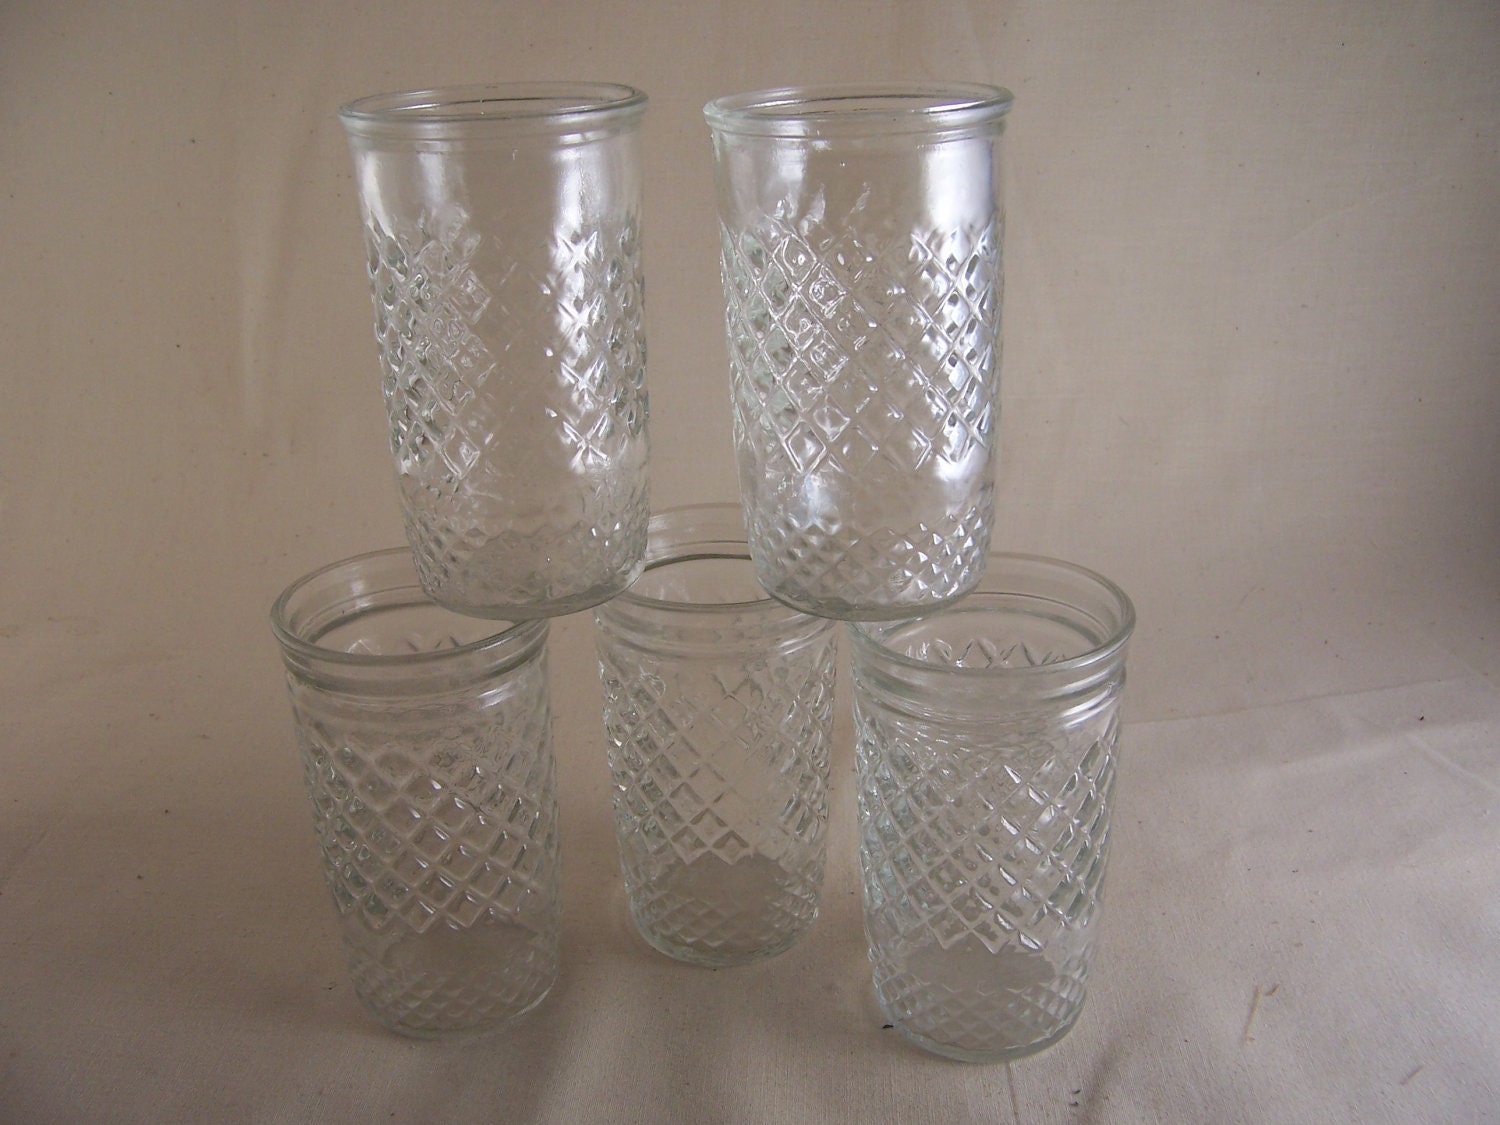 Vintage Jelly Jar Or Kitsch Drinking Glass Collection Retro